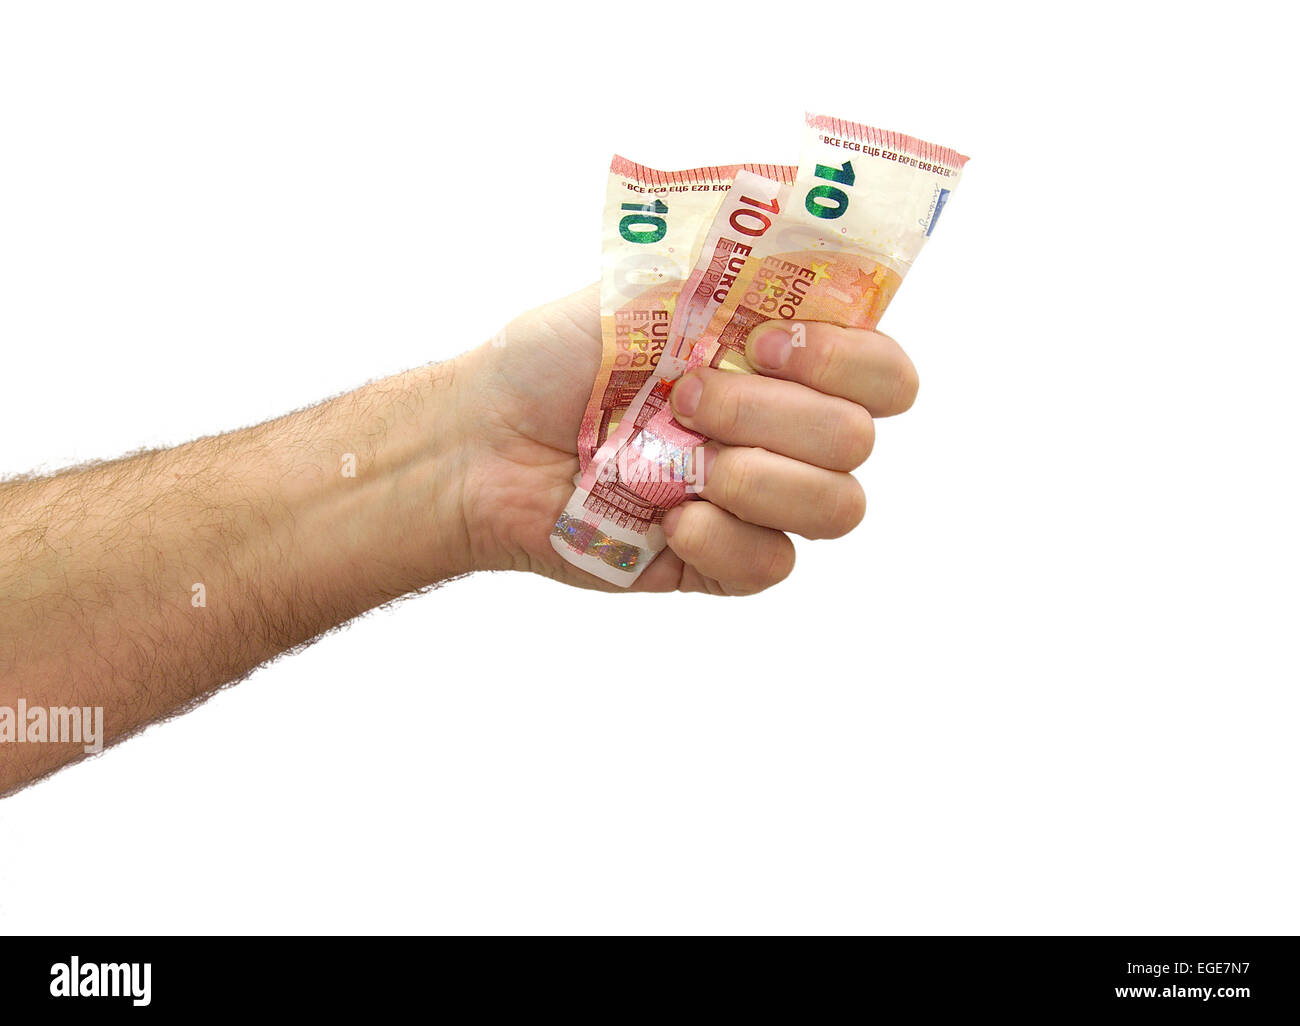 Caucasian hand tightening 10 euros banknotes isolated on white background Stock Photo